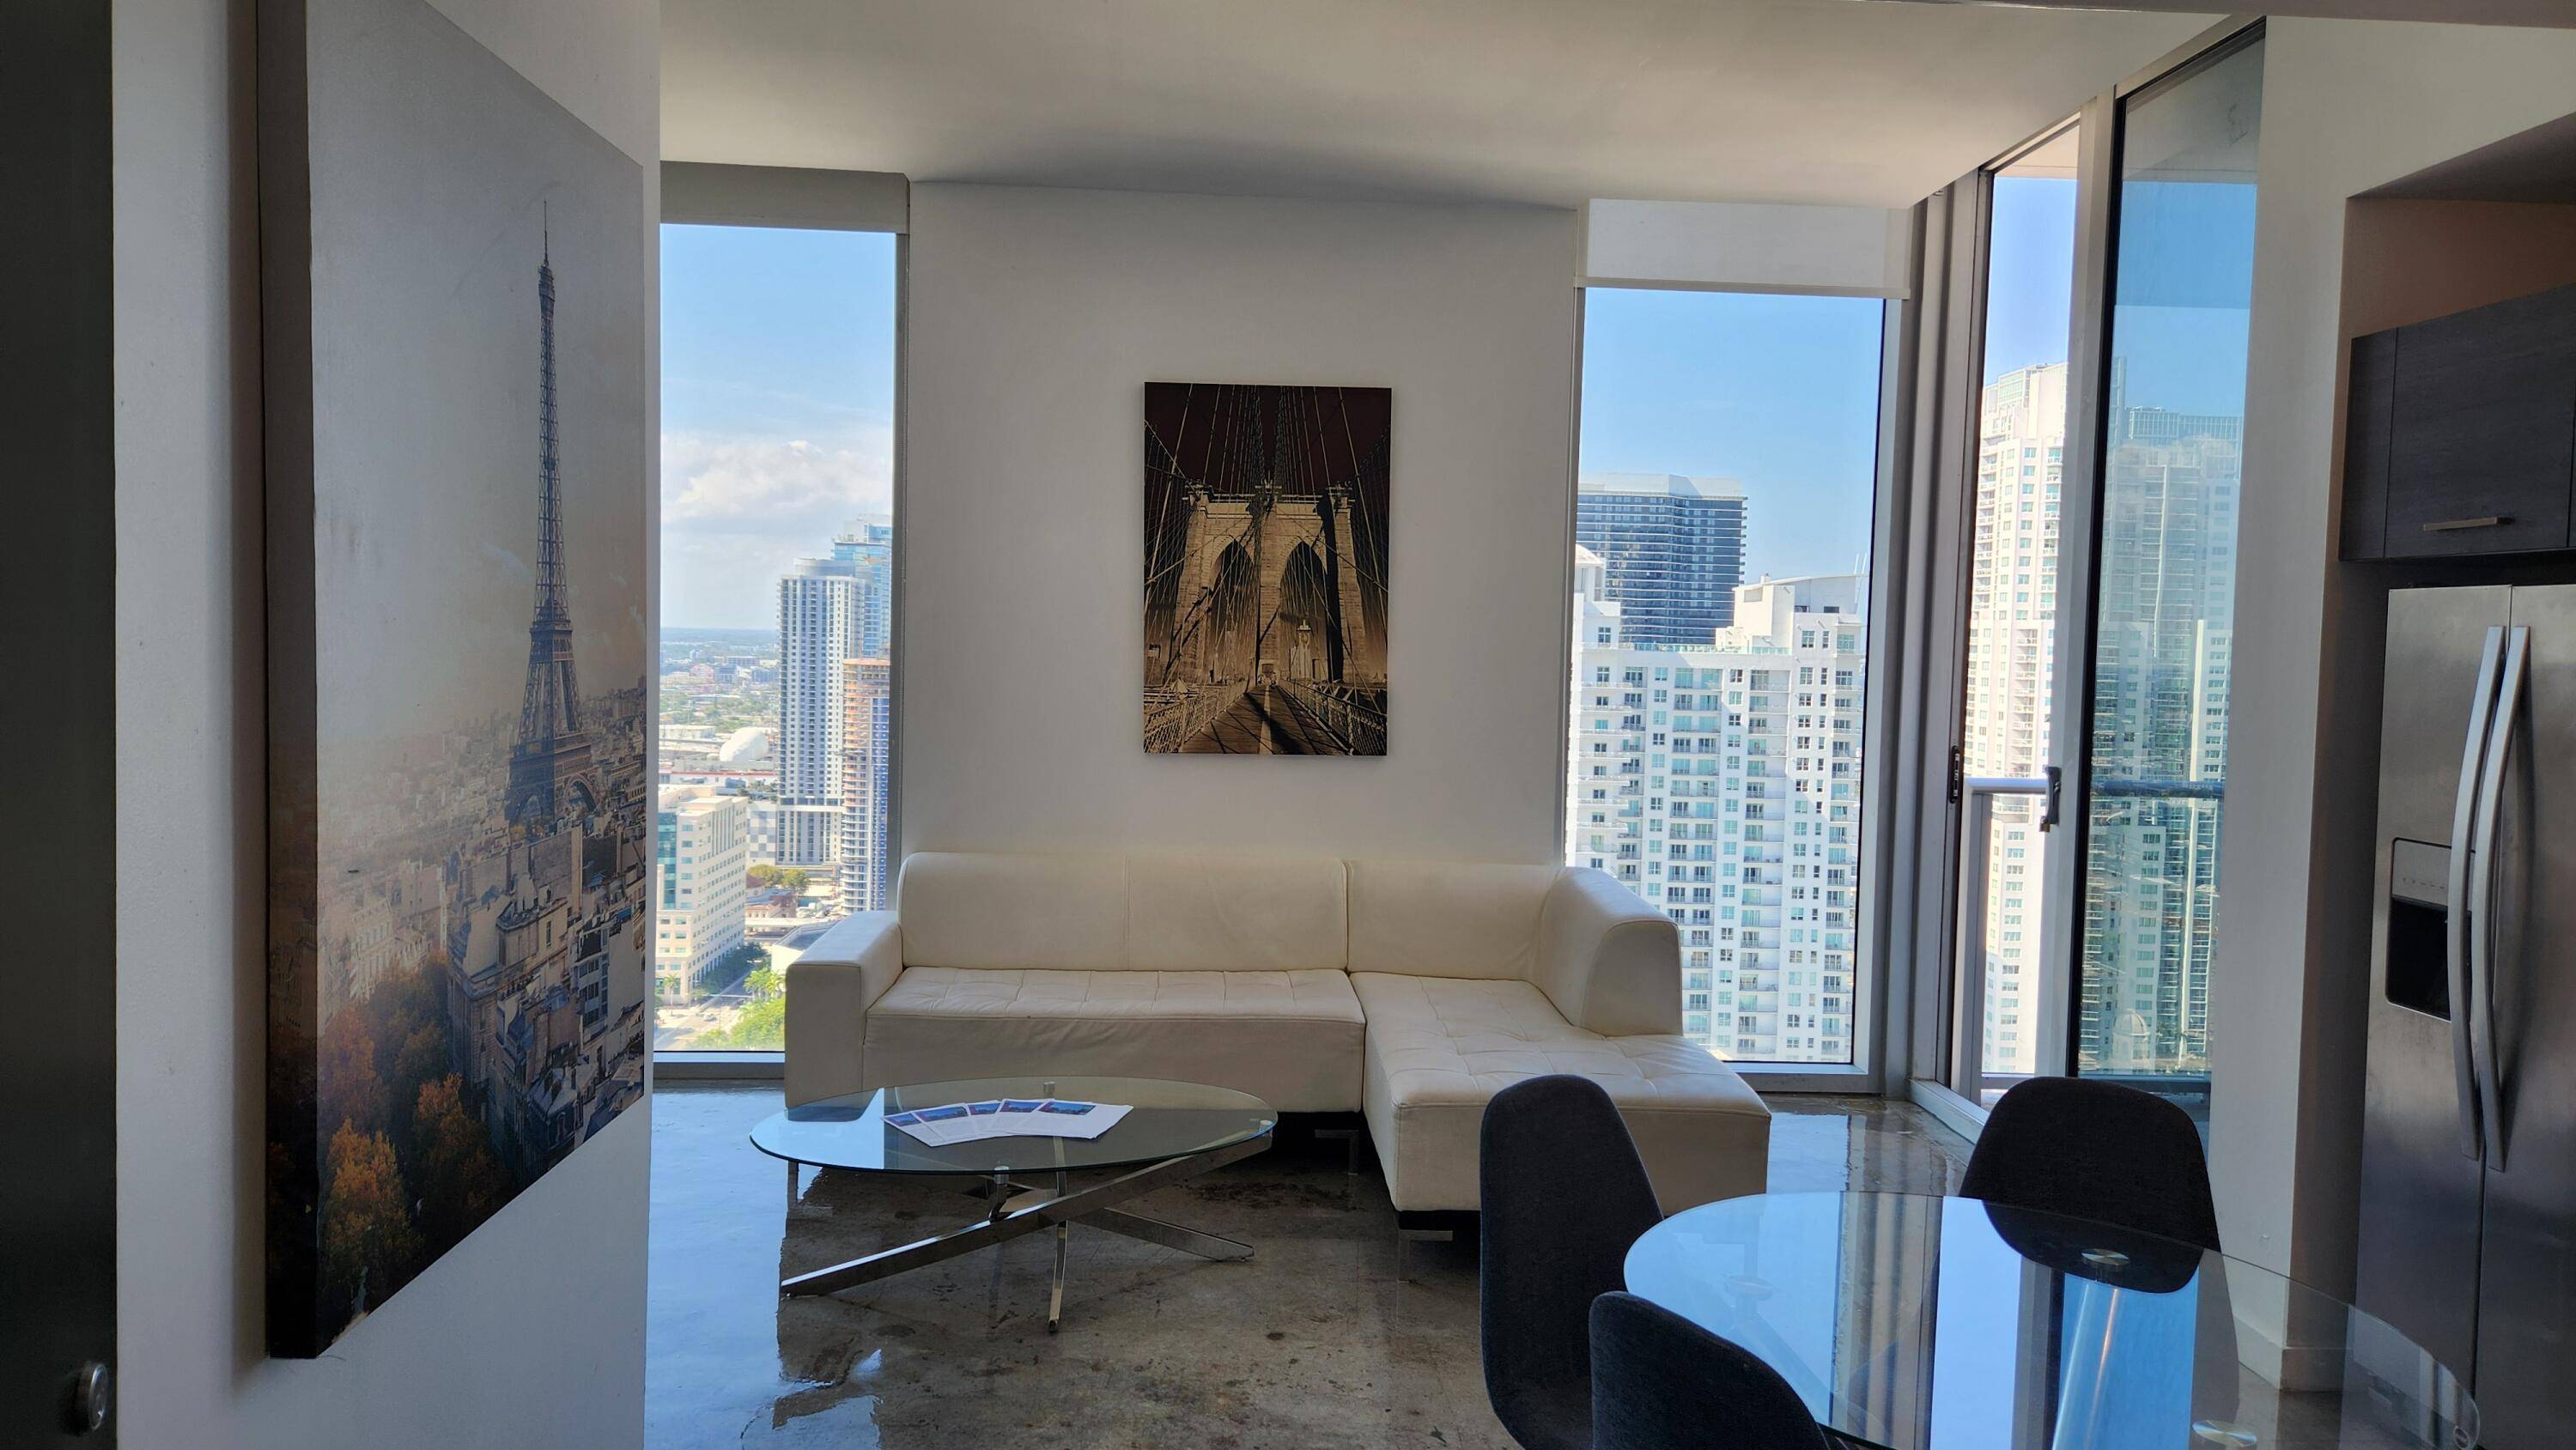 PRICED TO SELL MODERN ''CENTRO CONDO'' IN DOWNTOWN MIAMI, COME ENJOY BREATHTAKING VIEWS FROM YOUR 37TH FLOOR PENTHOUSE LOFT WITH LOTS OF LIGHT, OPEN FLOOR PLAN, HIGH CEILING, CONCRETE FLOOR, ...